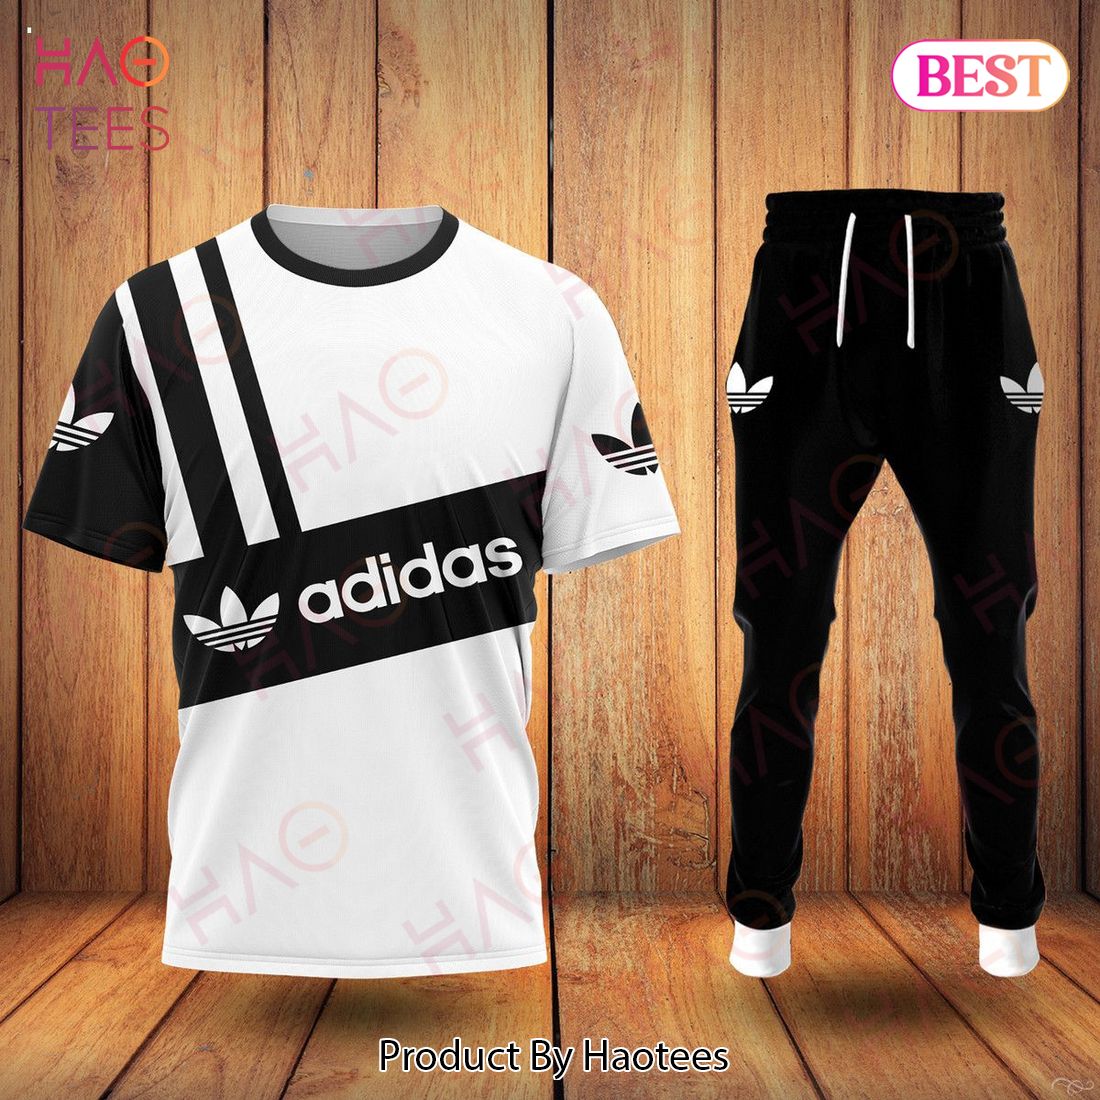 Adidas Black Mix White T-Shirt And Pants Luxury Brand Limited Edition